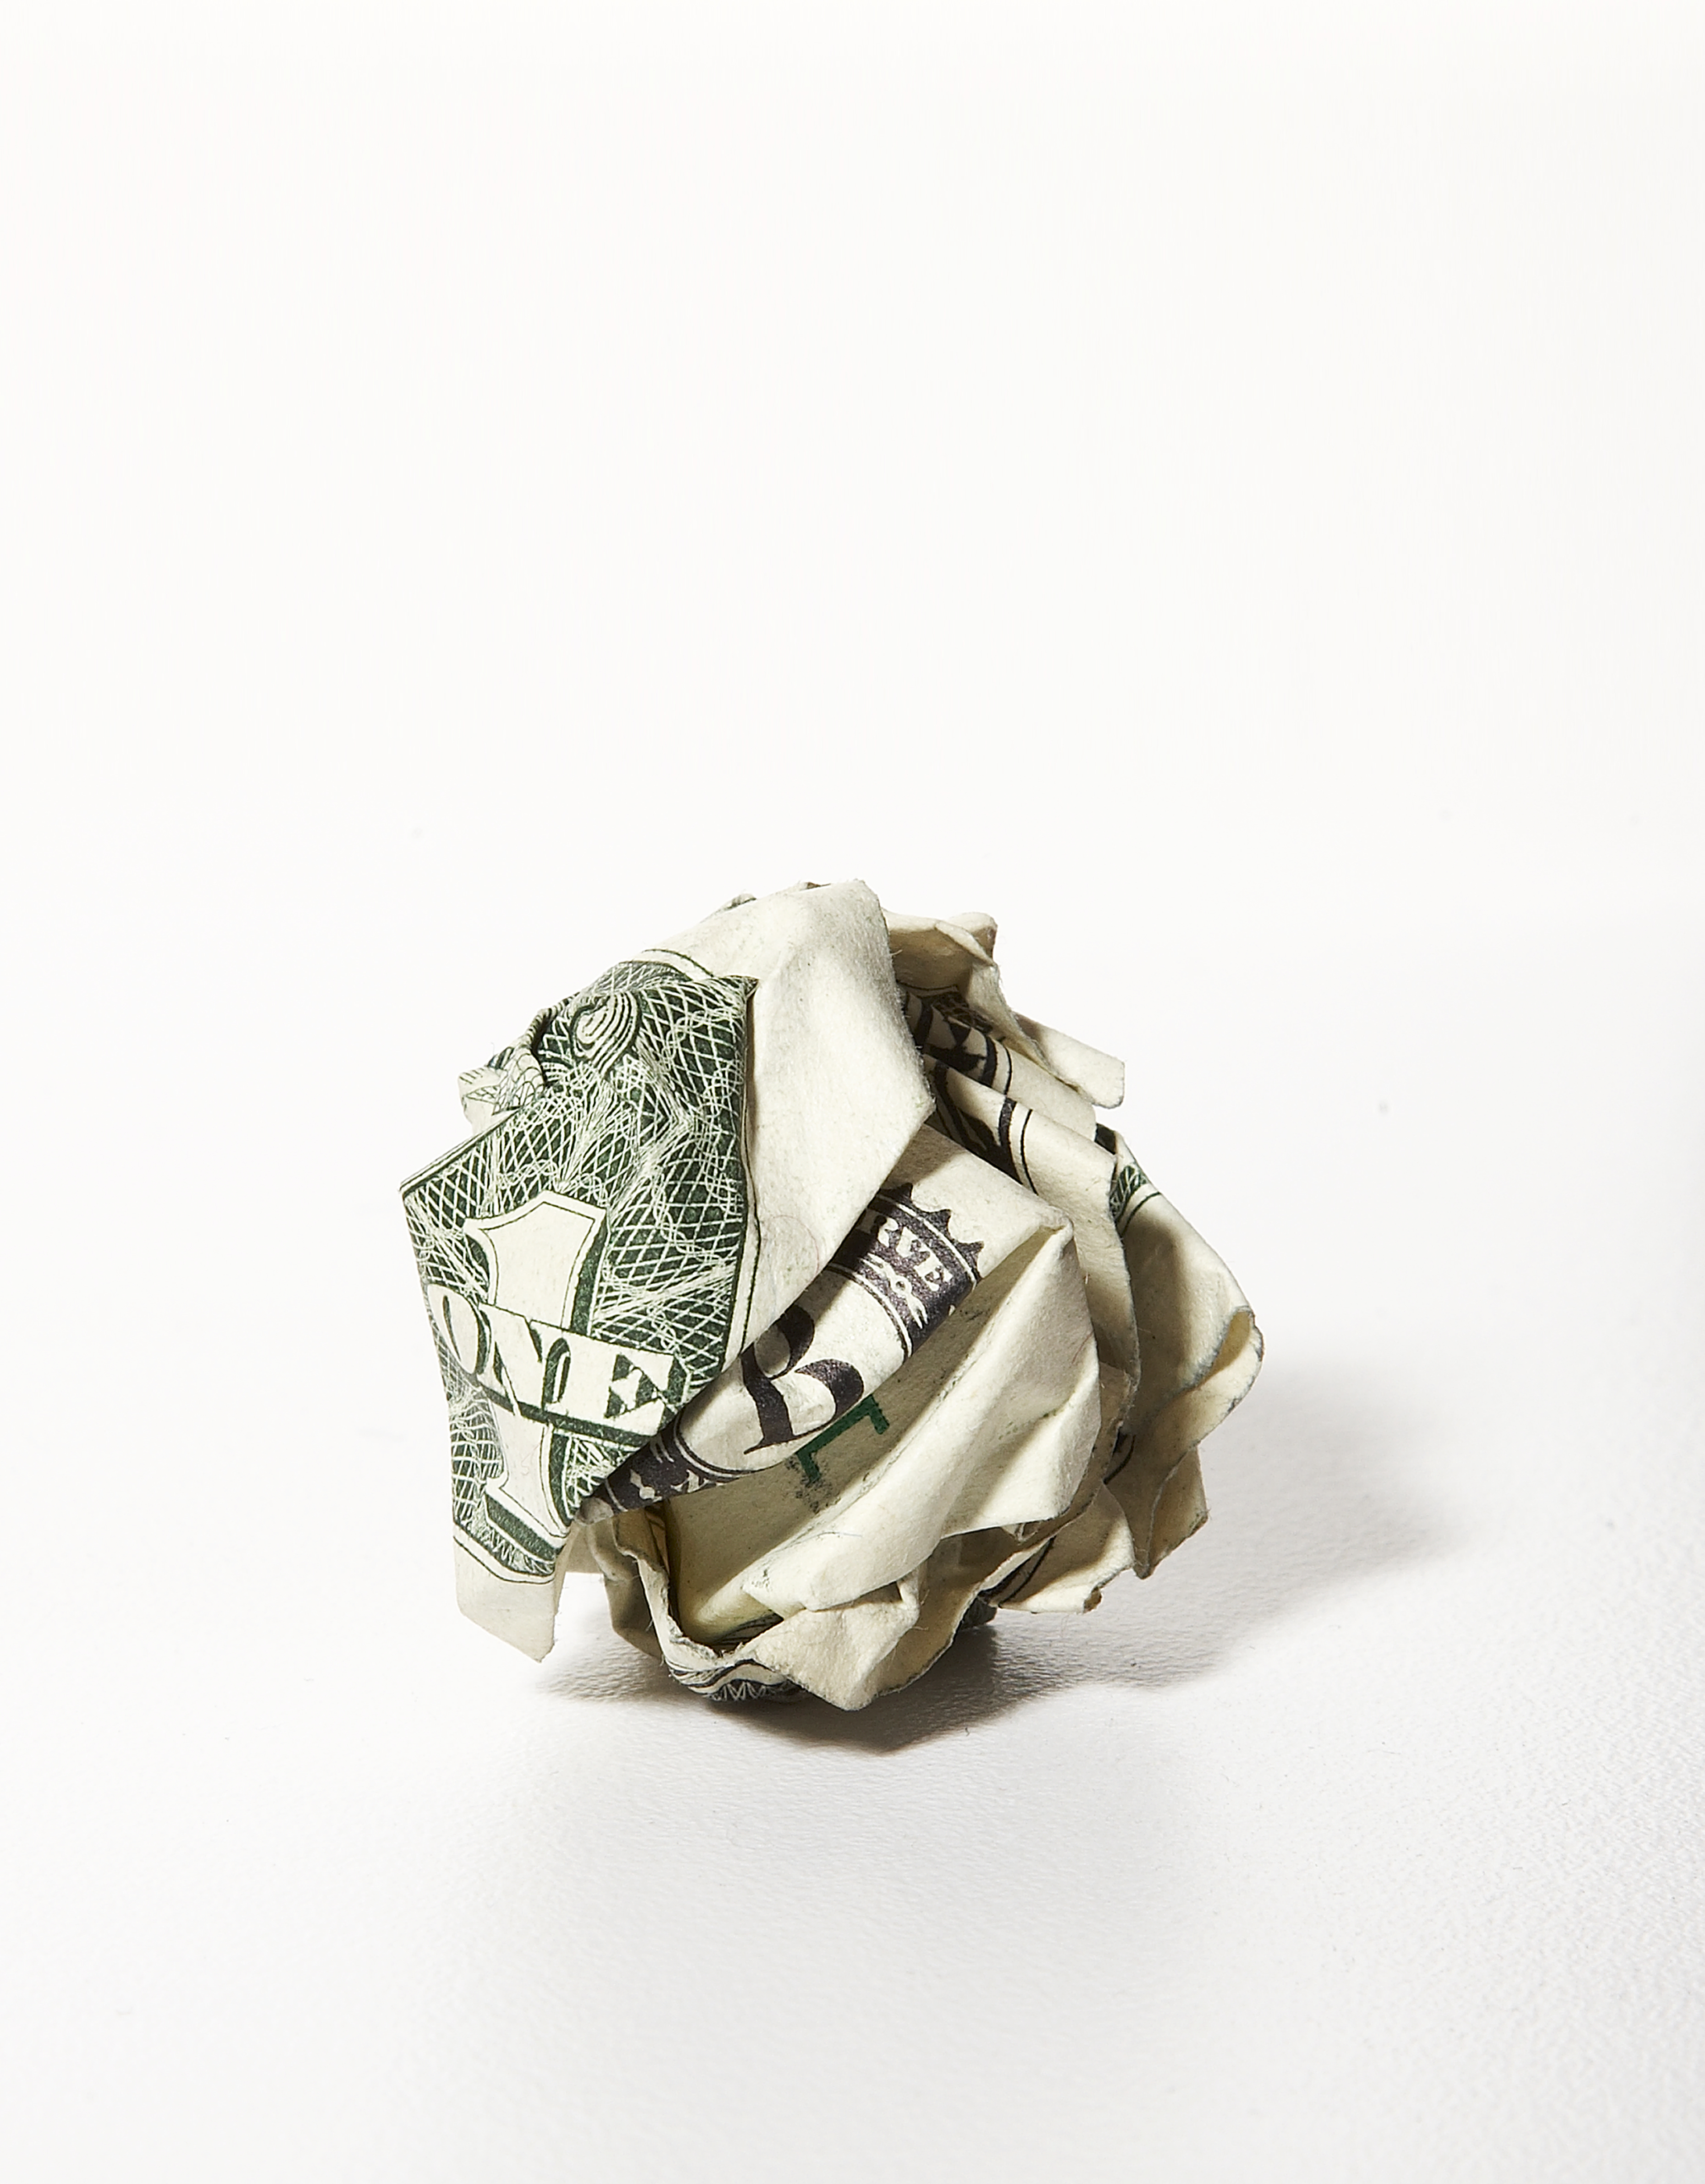 Crumpled US one-dollar bill on a plain background, symbolizing financial distress or loss